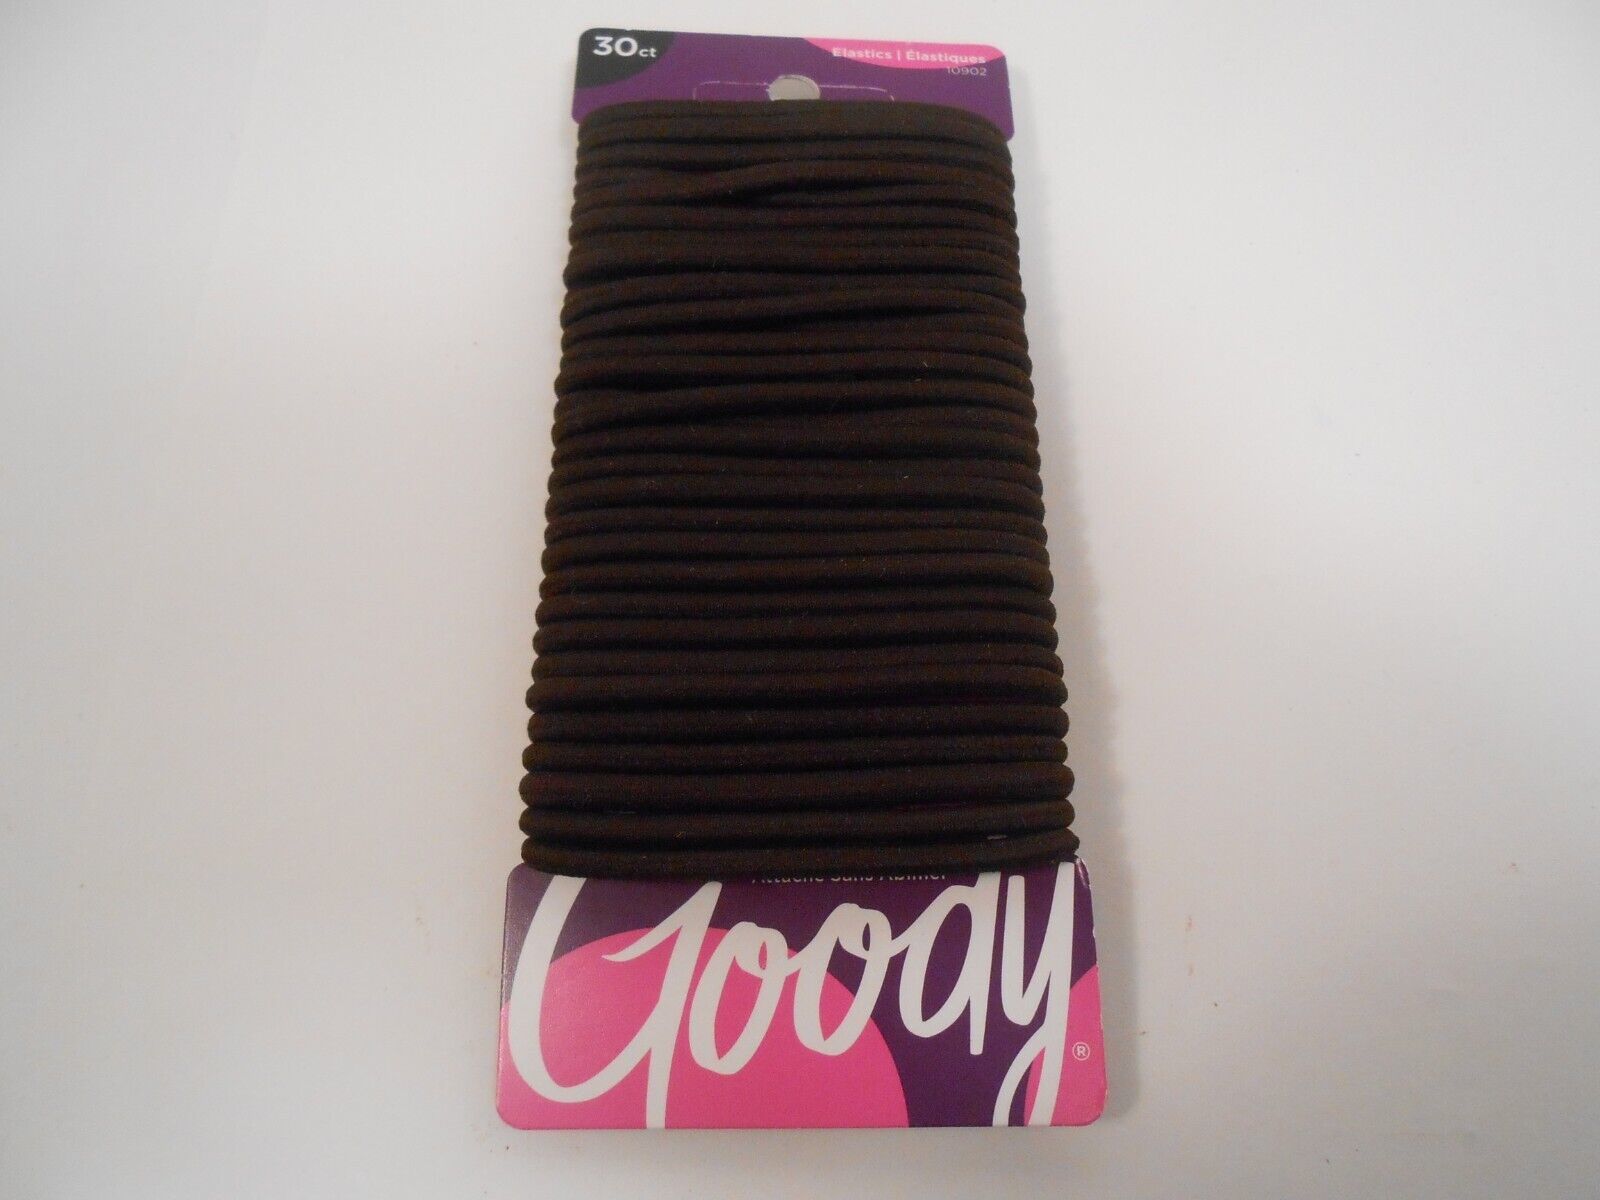 Primary image for Goody Ouchless Elastic Hair Tie - 30 Count Dark Brown